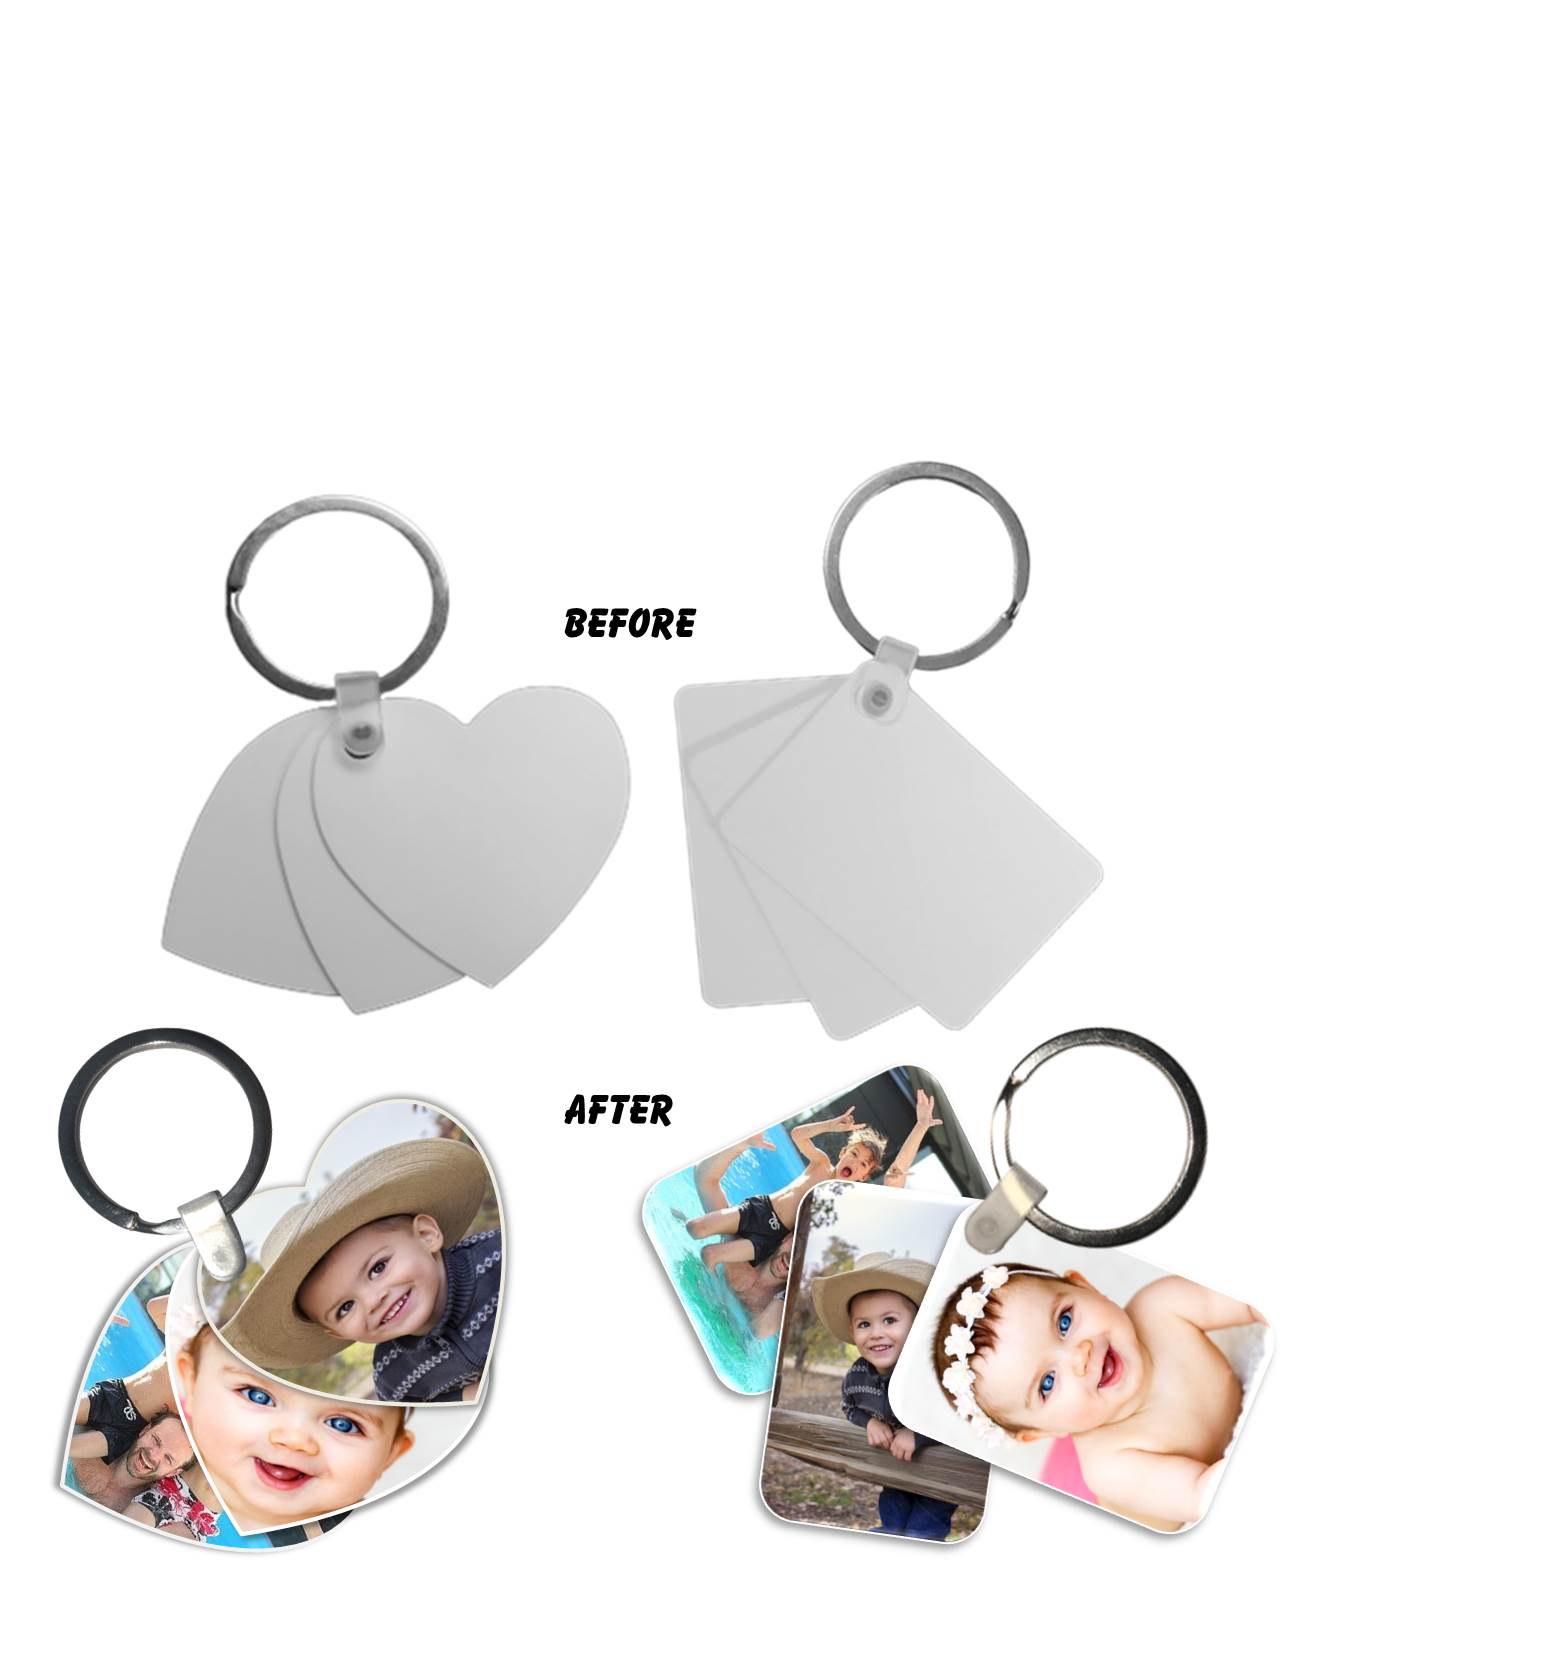 How To Sublimate Designs onto Keychain Blanks – Sublimation for Beginners